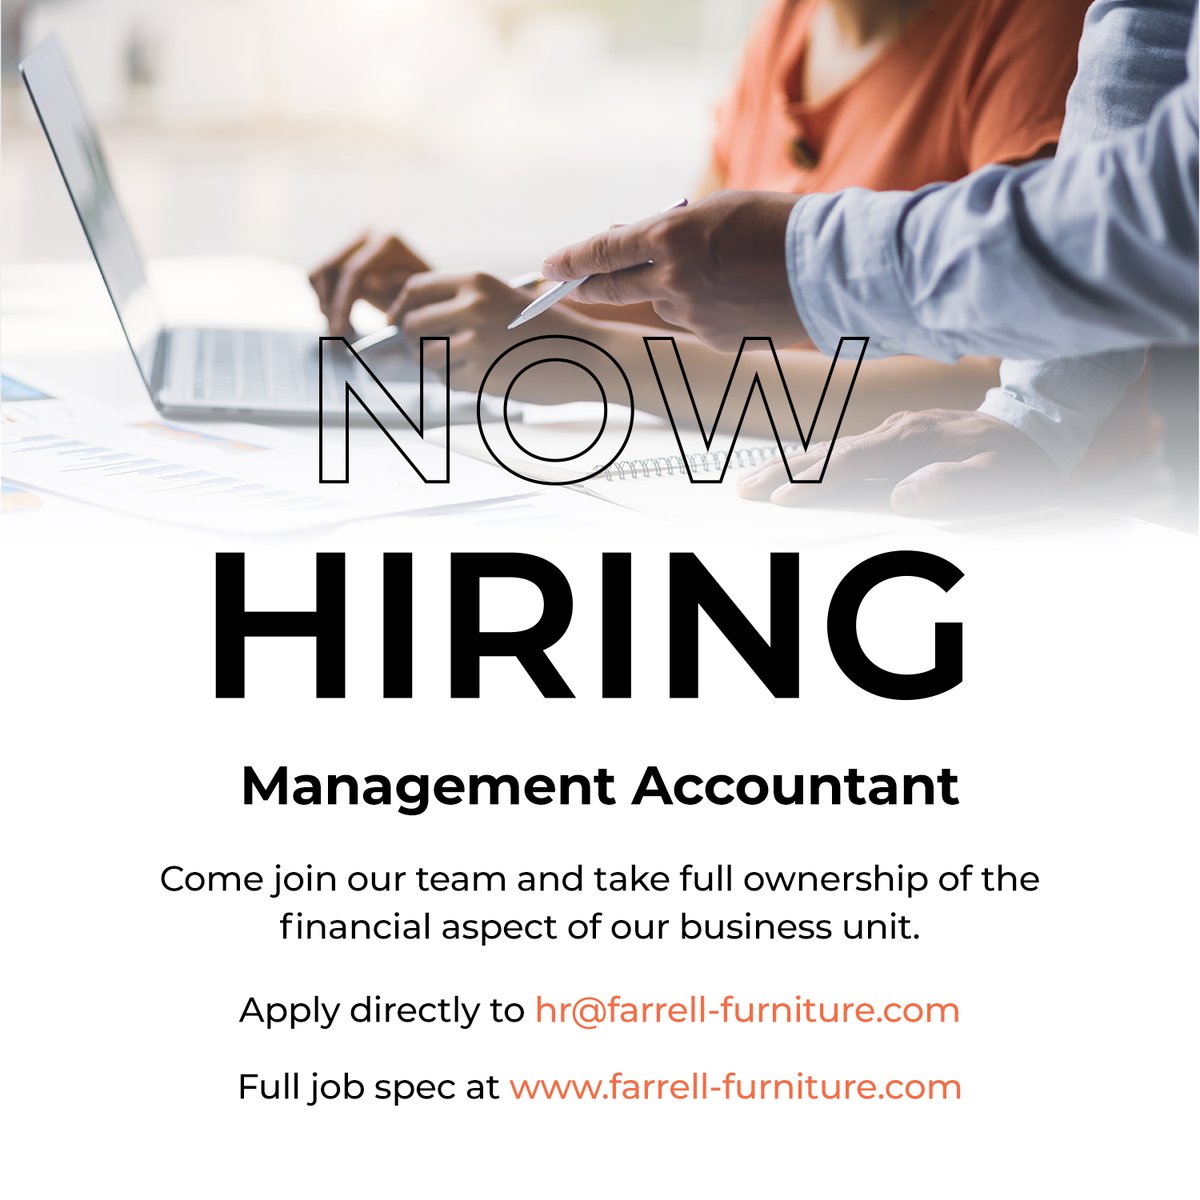 📢 We're hiring a Management Accountant. 
Interested in joining the Farrell team? View the full job spec at: farrell-furniture.com/now-hiring-man… 

#louthjobs #ardeejobs #recruitment #accountant #management #finance #accounting #irishjobs #furniture #hiring @ArdeeTown